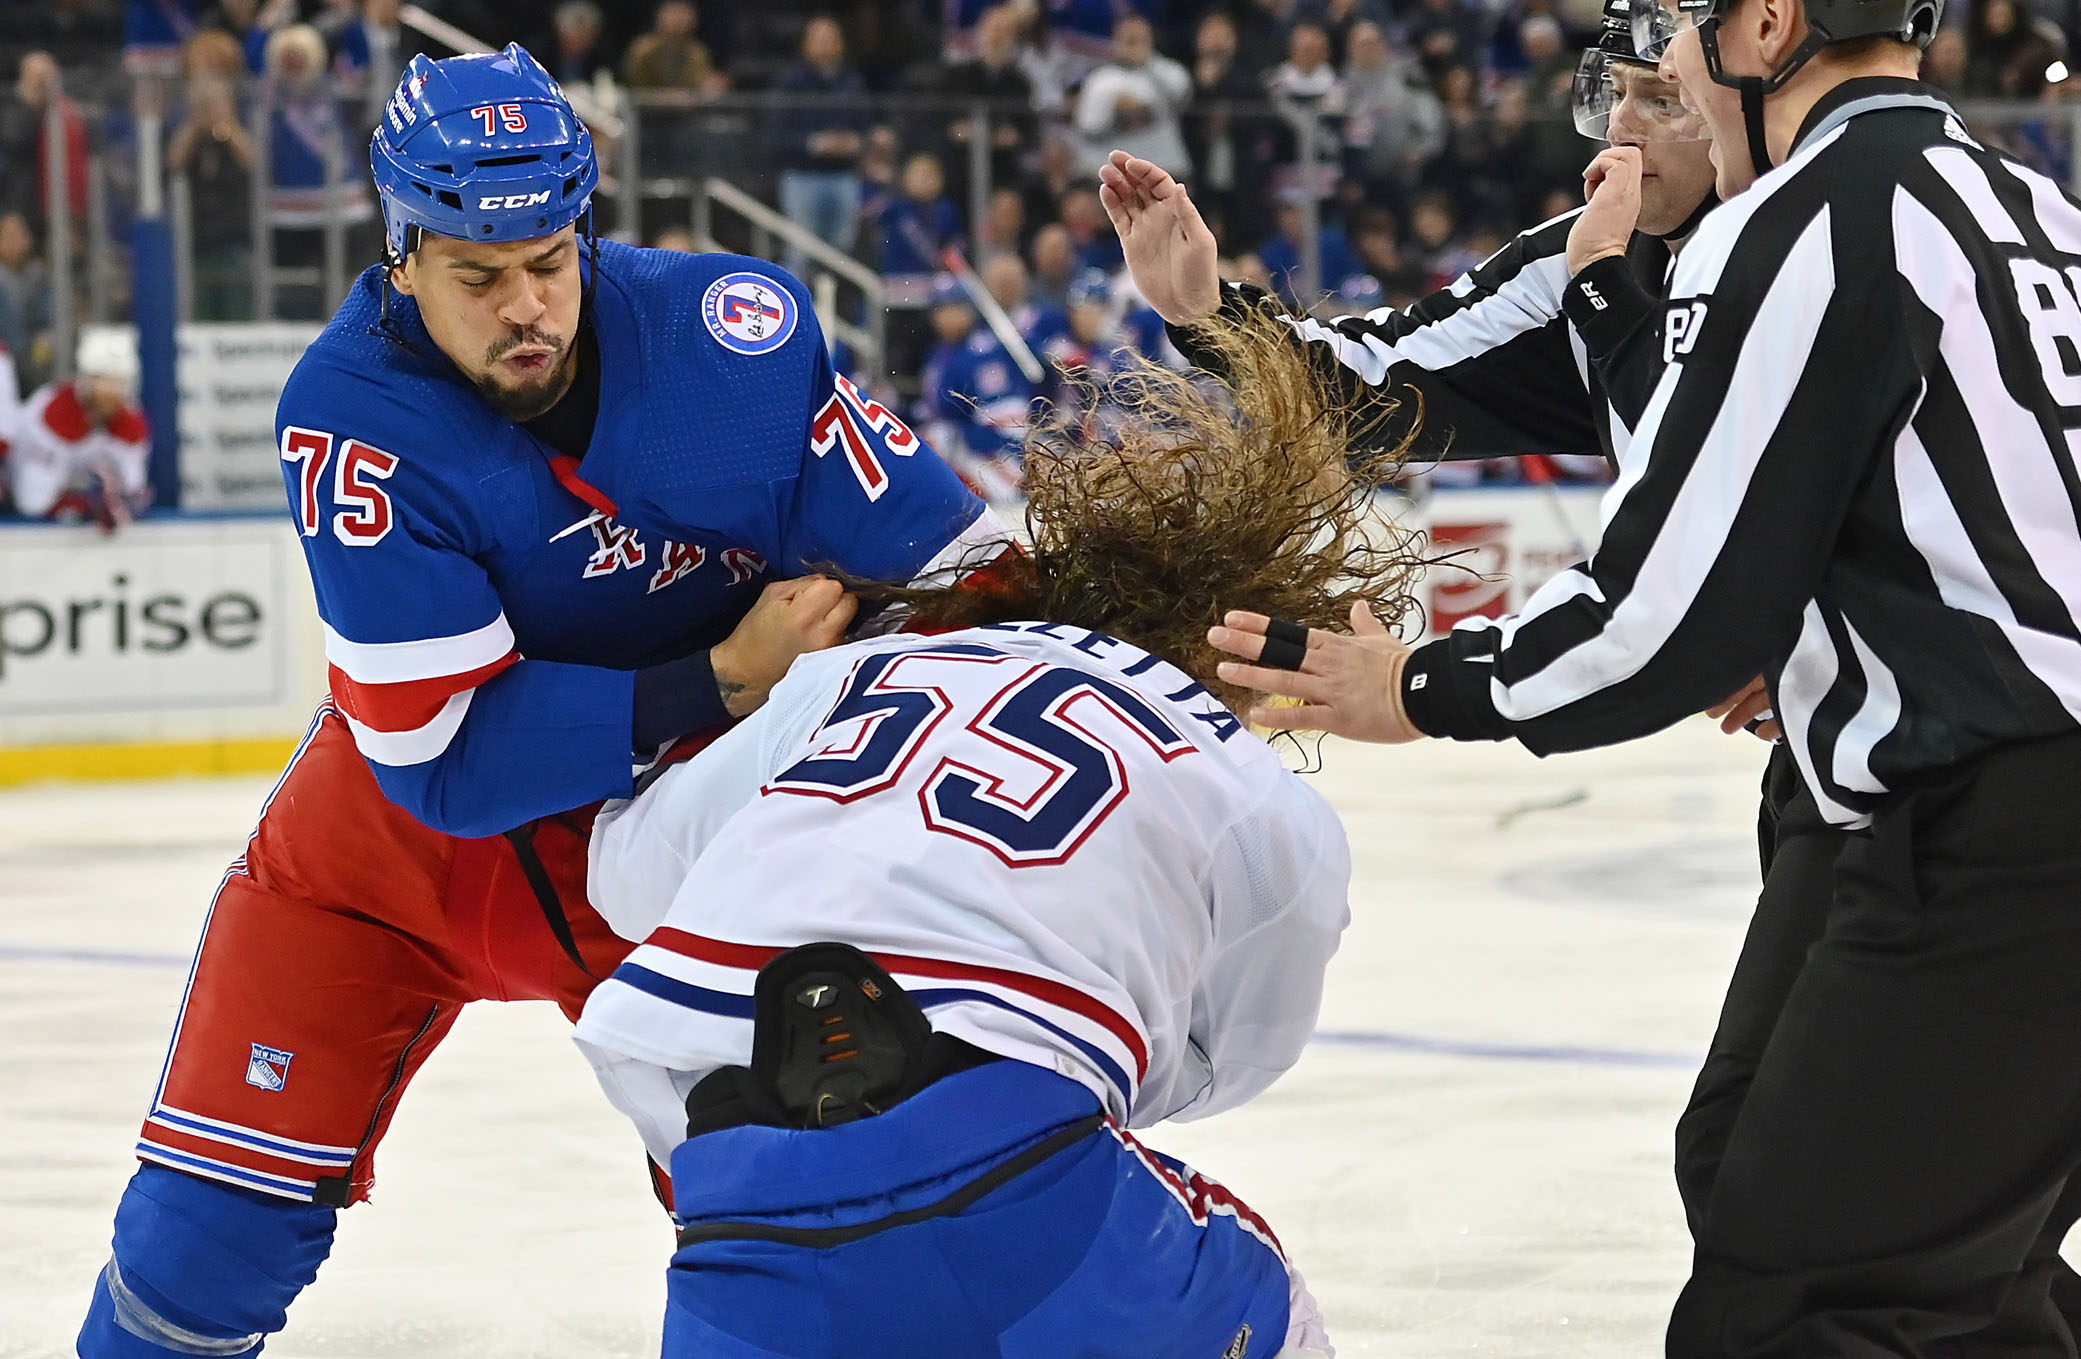 Ryan Reaves (left) fights Michael Pezzetta during the Rangers' 3-2 victory over Canadiens.